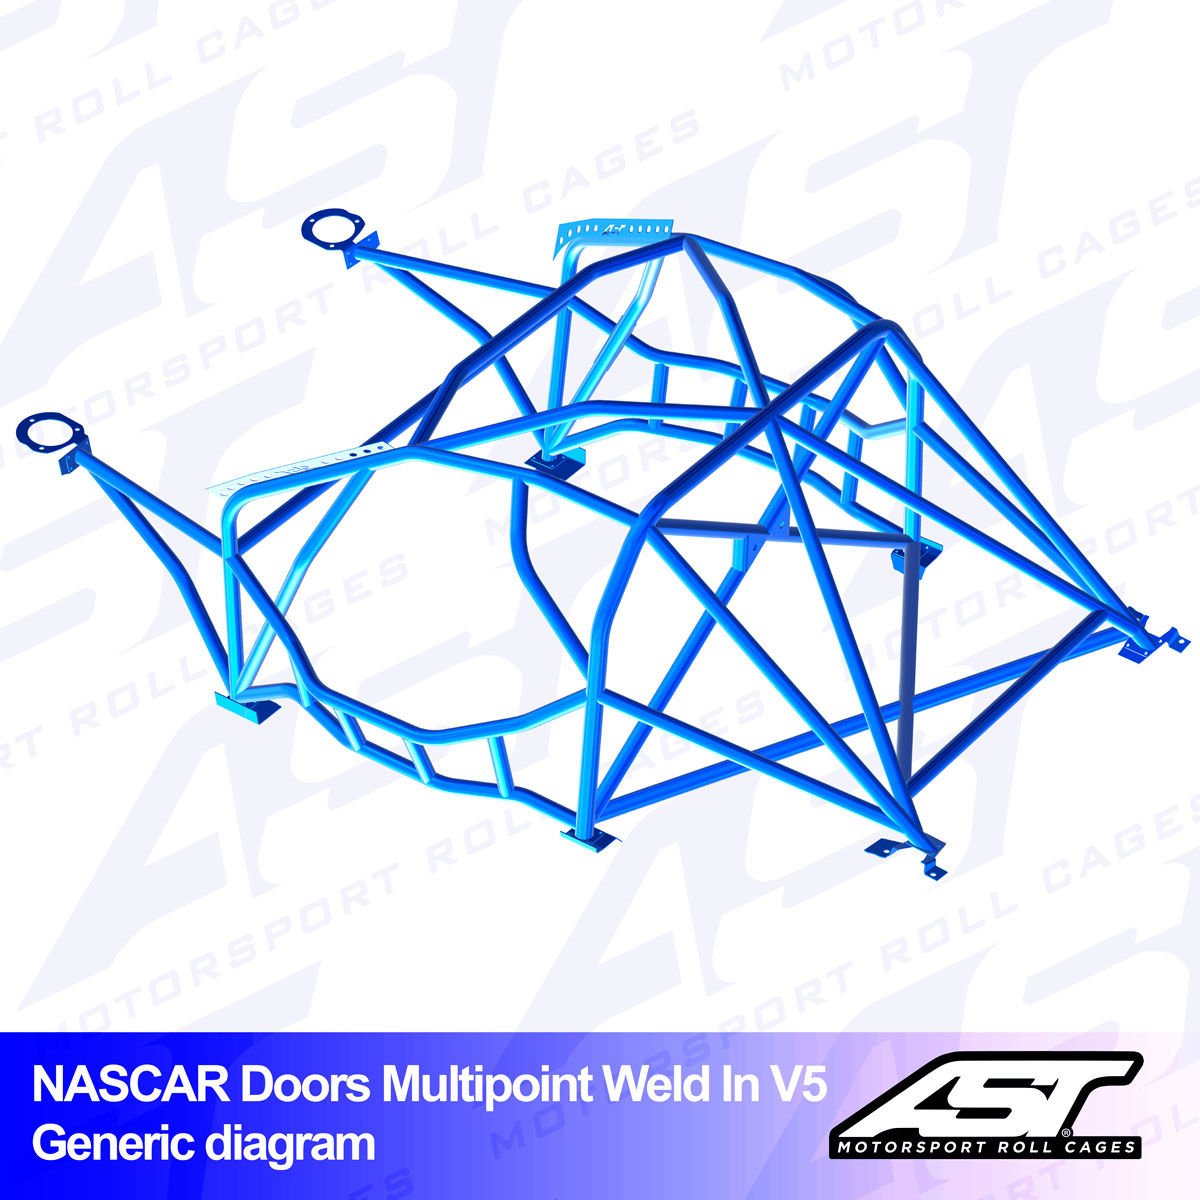 Roll Cage BMW (F87) 2-Series 2-doors Coupe RWD MULTIPOINT WELD IN V5 NASCAR-door for drift